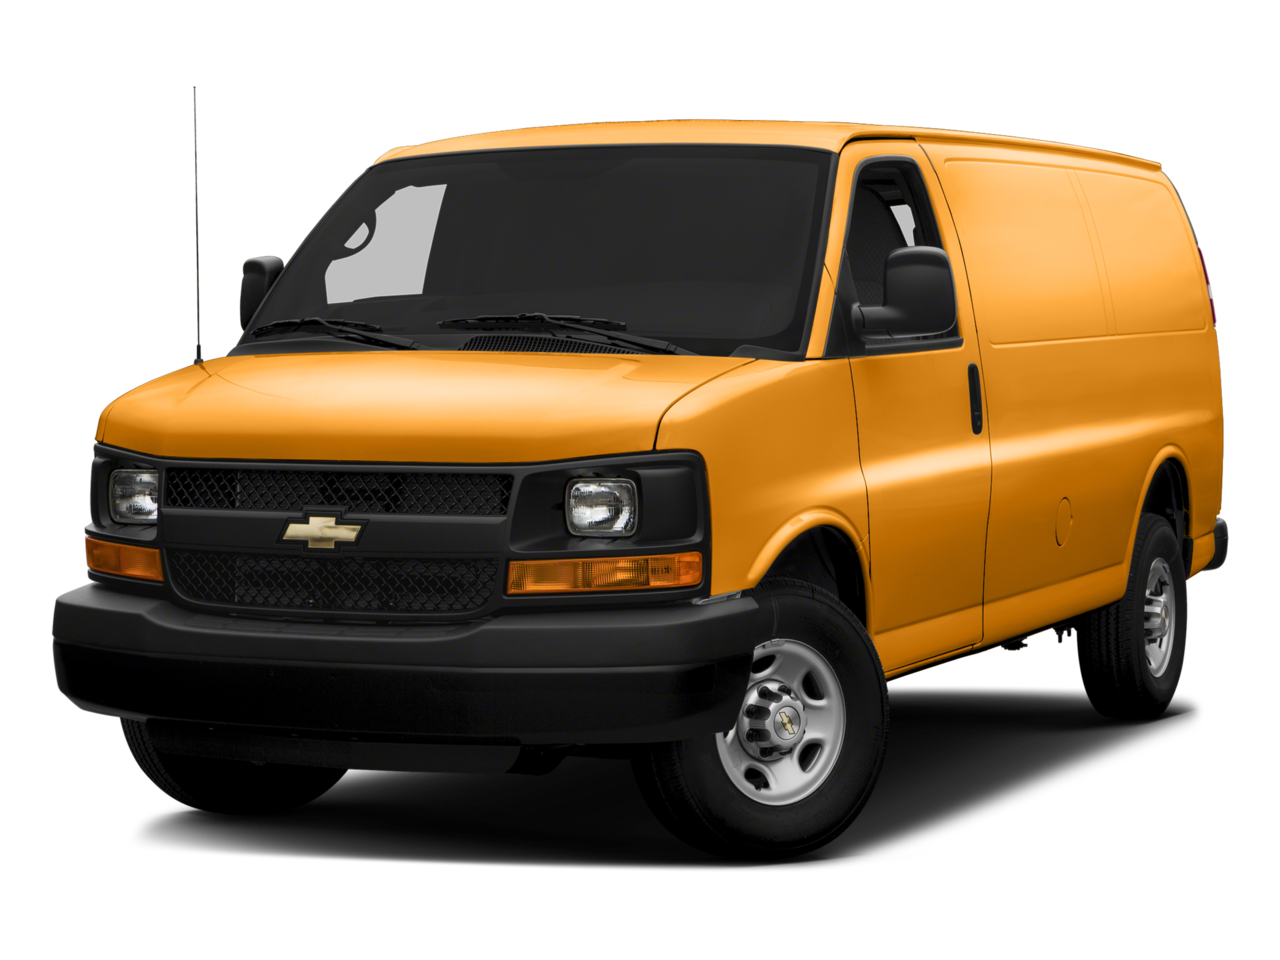 2015 Chevrolet Express 2500 Repair: Service and Maintenance Cost